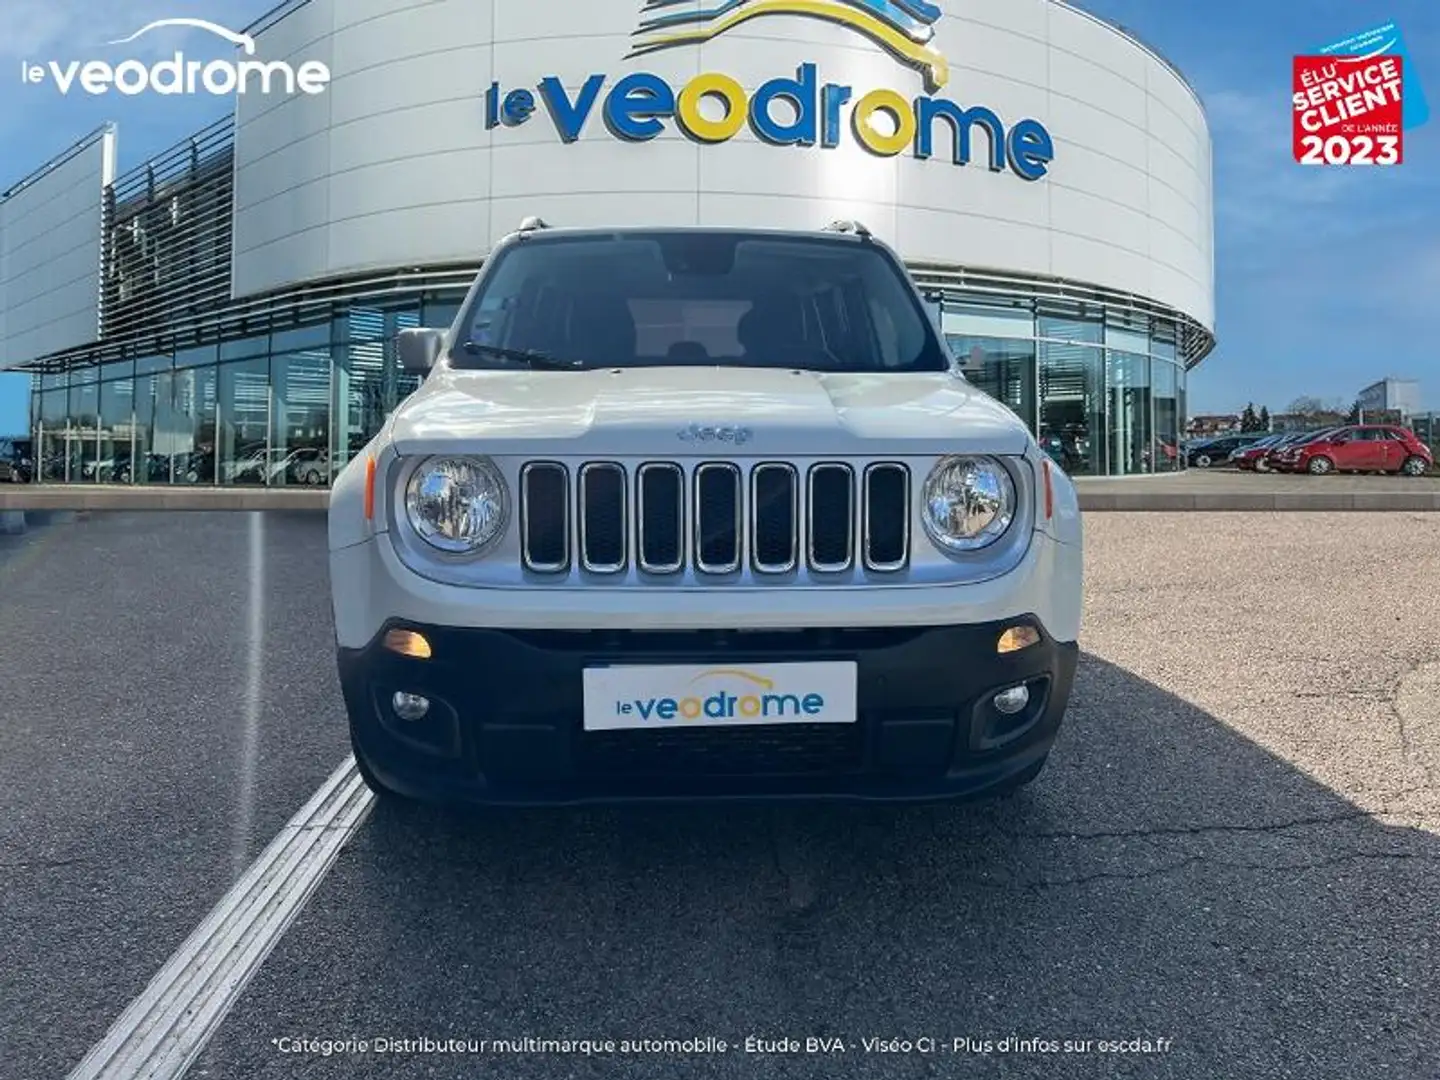 Jeep Renegade 1.4 MultiAir S/S 140ch Limited - 2